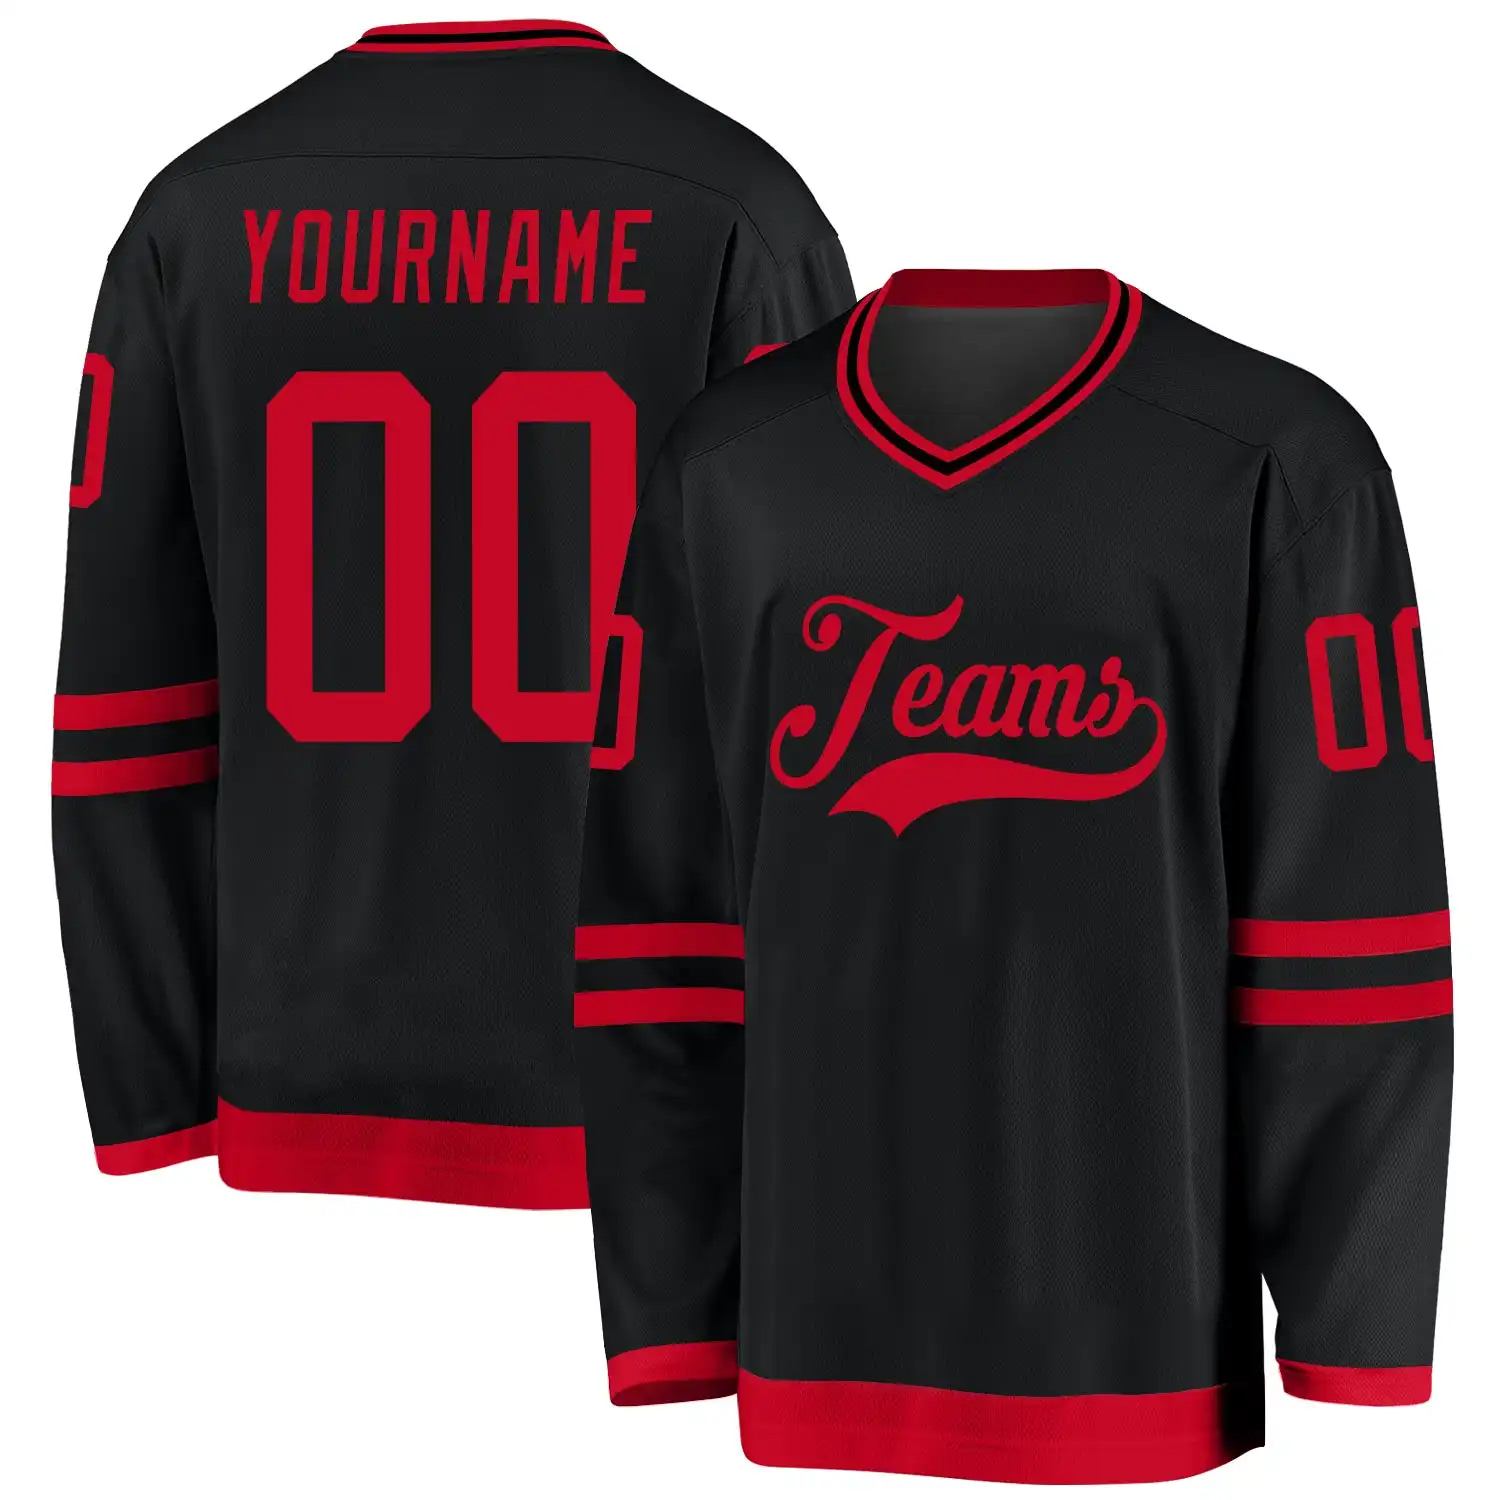 Stitched And Print Black Red Hockey Jersey Custom